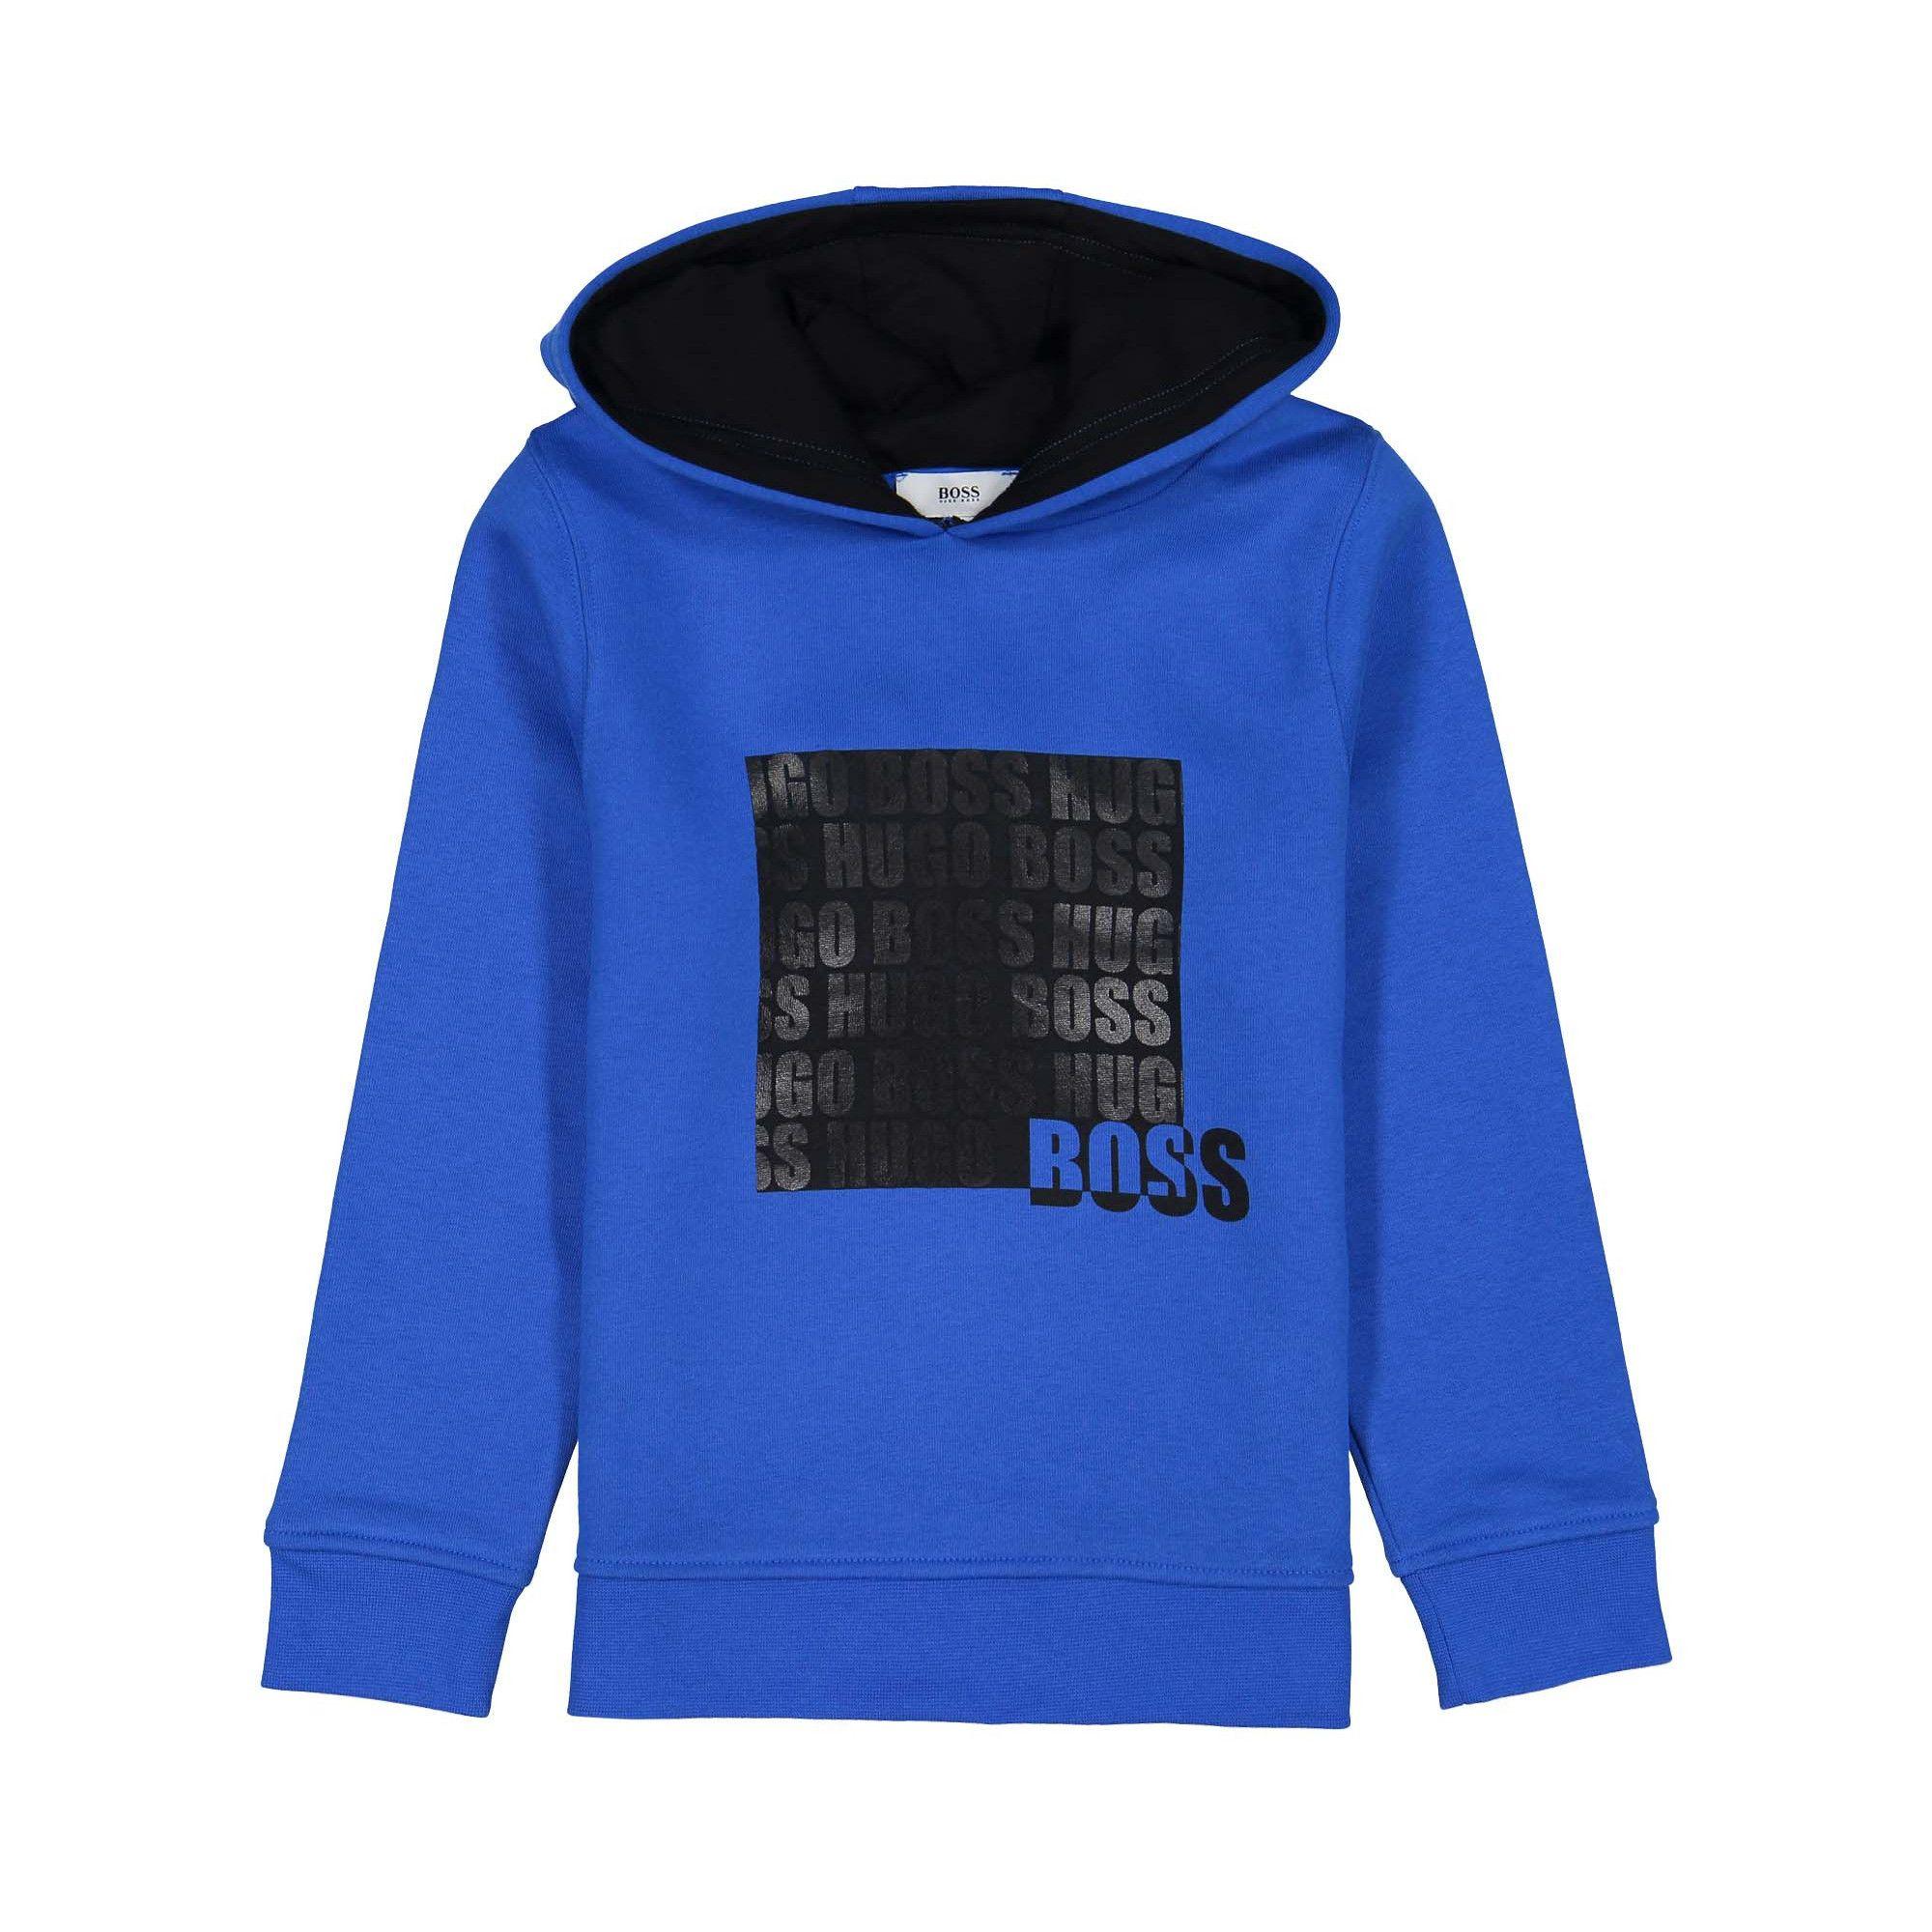 Square in a Blue P Logo - BOSS Boys Square Logo Hoodie in Blue